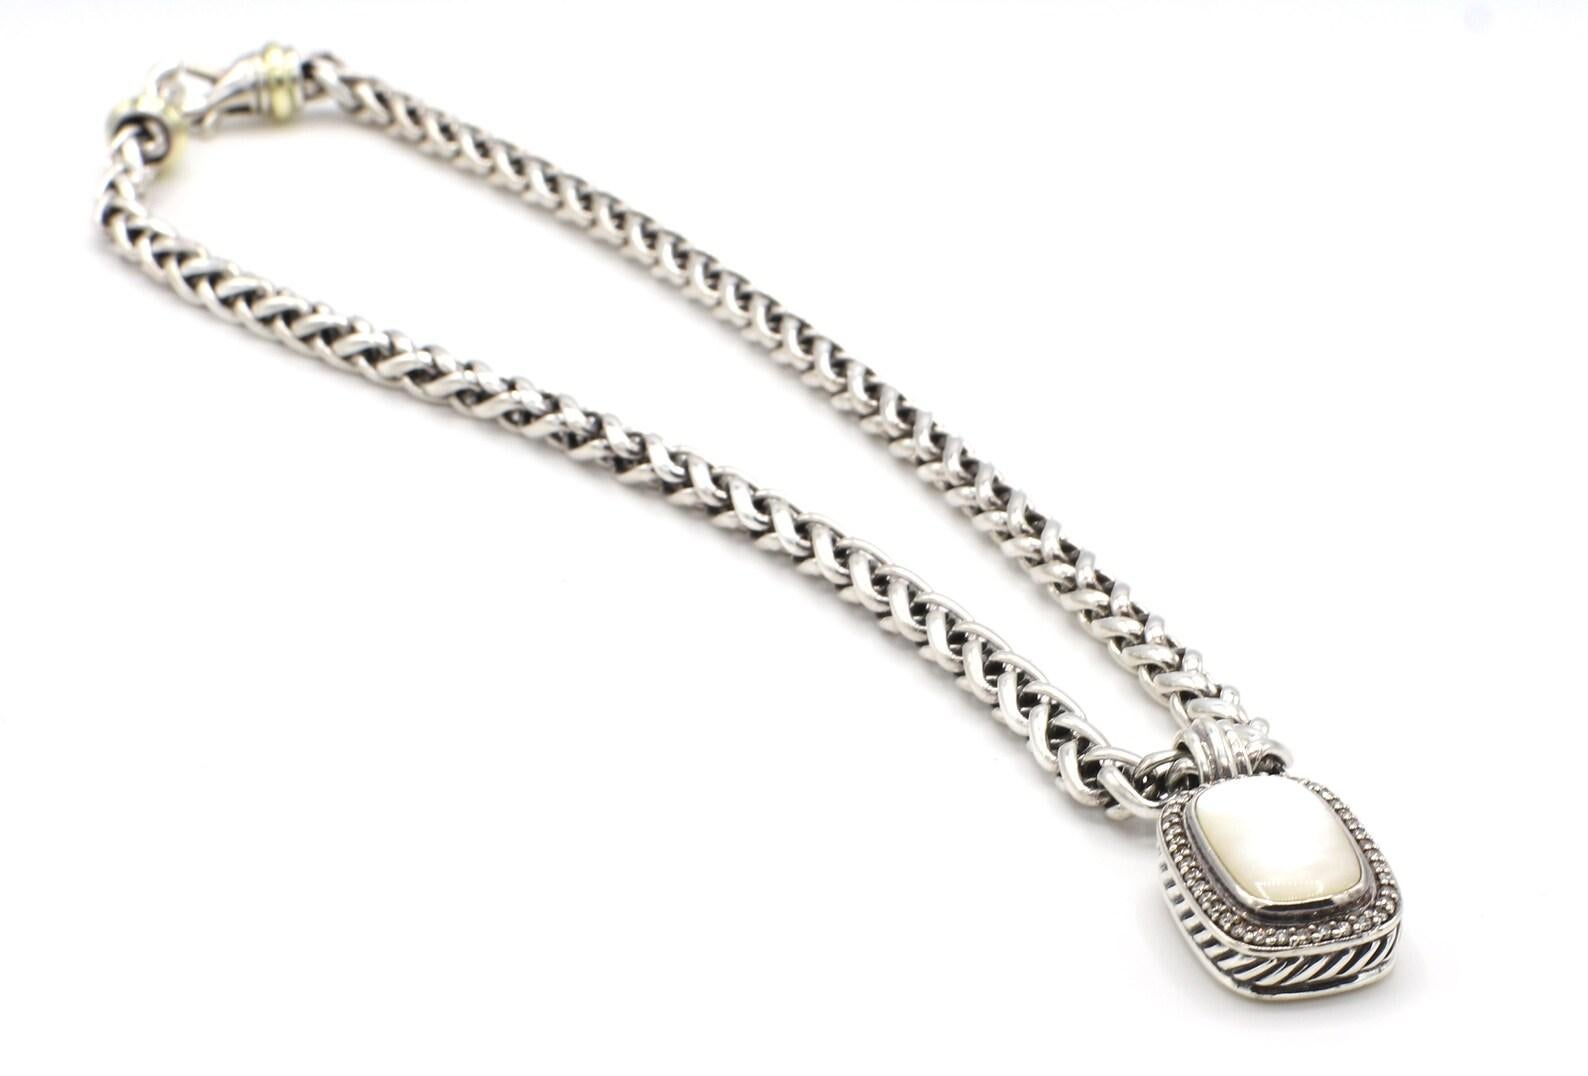 David Yurman Sterling Silver Albion Natural Diamond & Mother of Pearl Enhancer Necklace
Metal: Sterling silver & 14k yellow gold
Weight: 60.9 grams
Diamonds: Approx. .37 CTW G-H VS -SI natural diamonds
Chain length: 17 inches
Enhancer length: 1.33